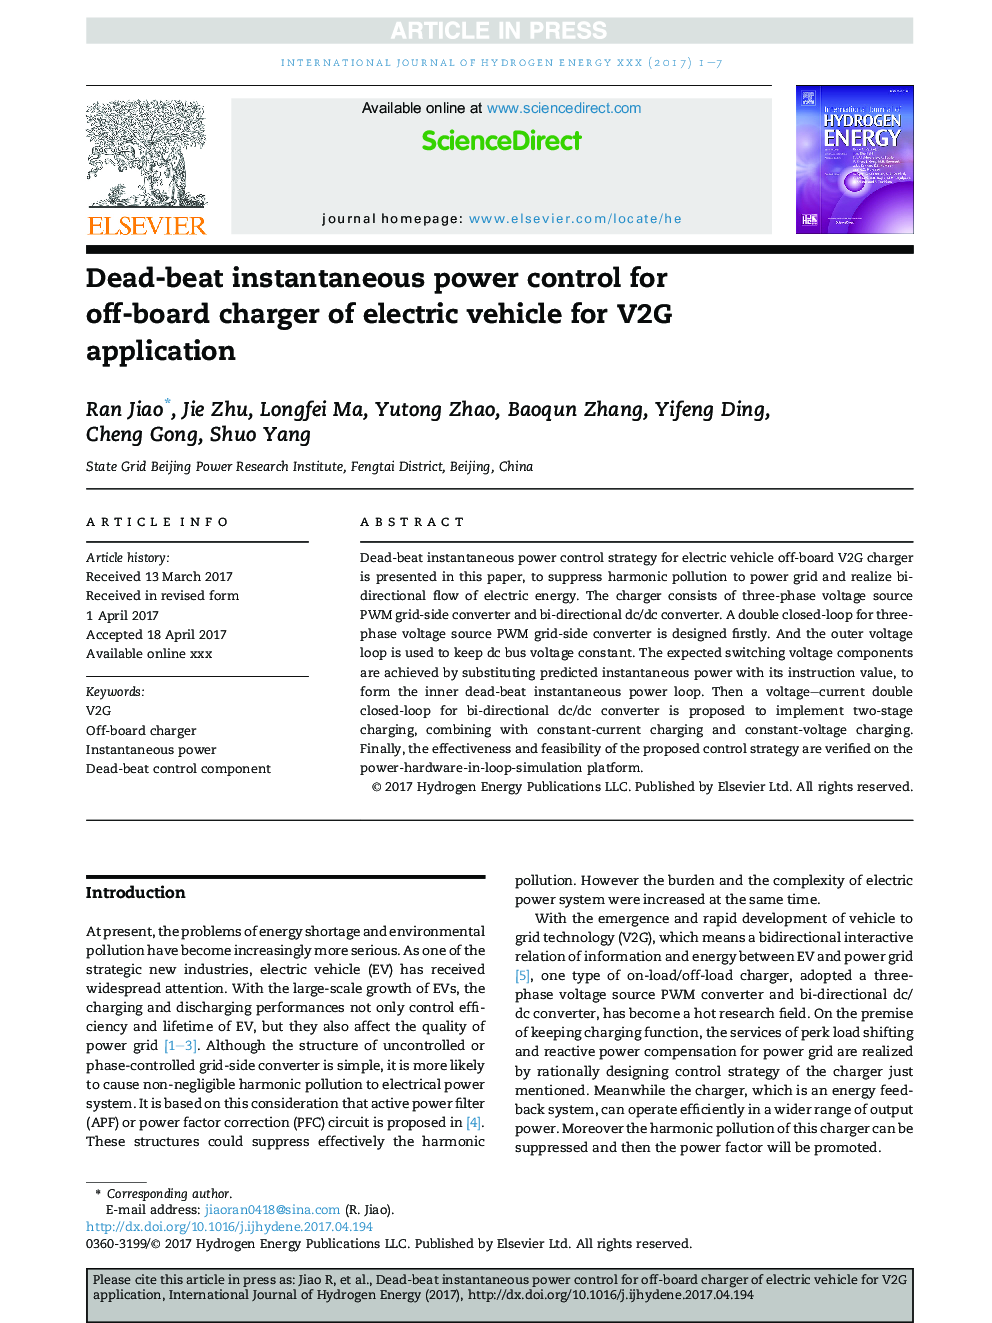 Dead-beat instantaneous power control for off-board charger of electric vehicle for V2G application